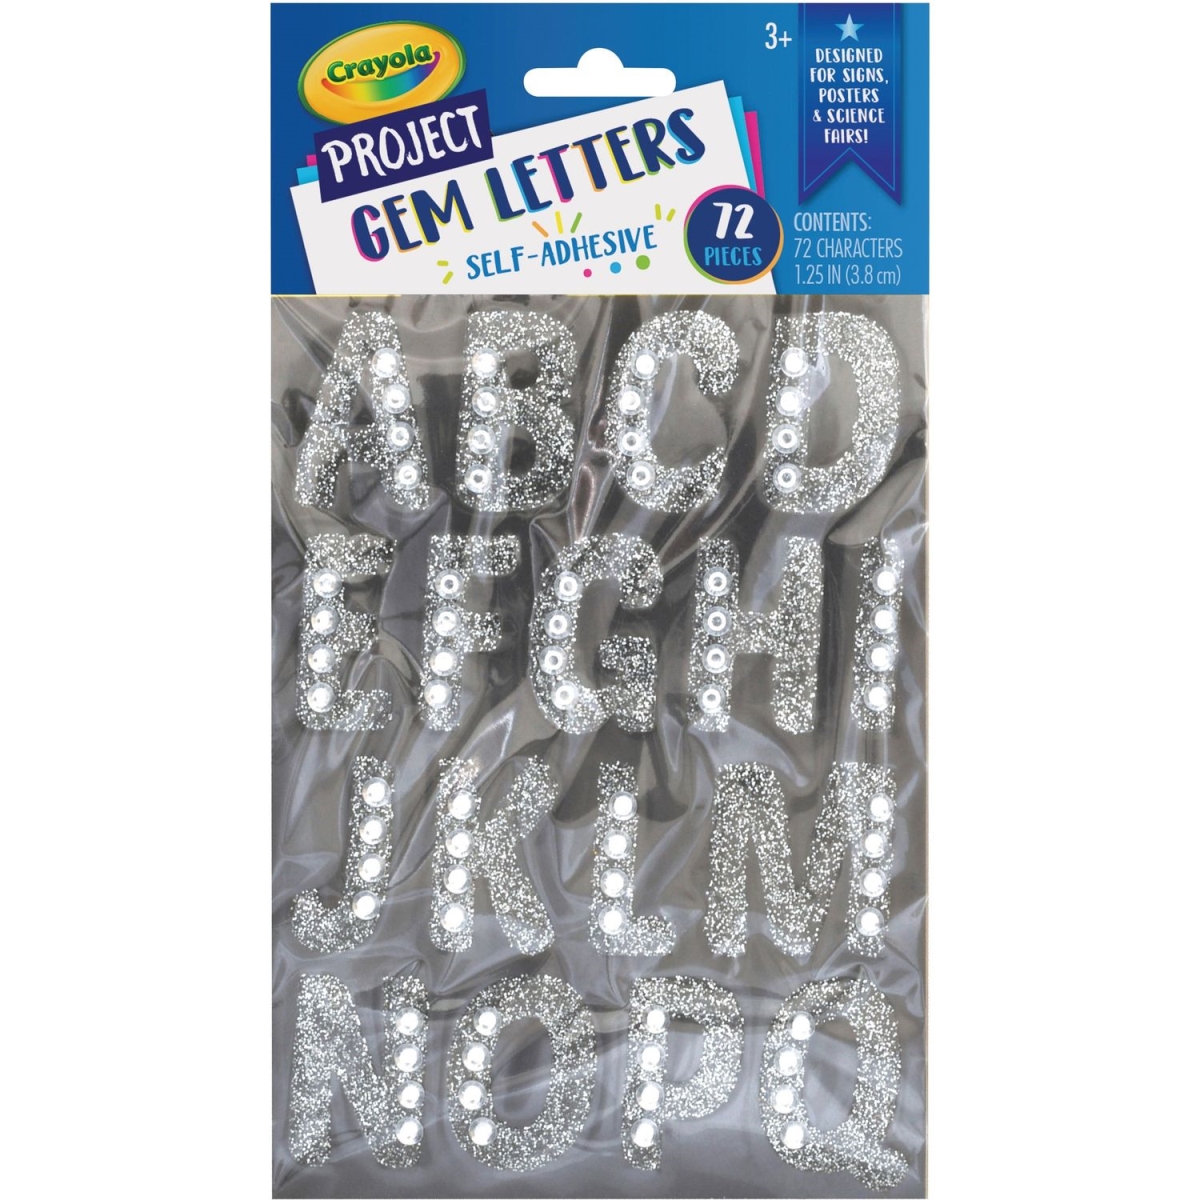 Picture of Pacon PACP1665CRA 1.25 in. Crayola Sparkling Gems Sticker Letters - Self-Adhesive, Silver - Pack of 24